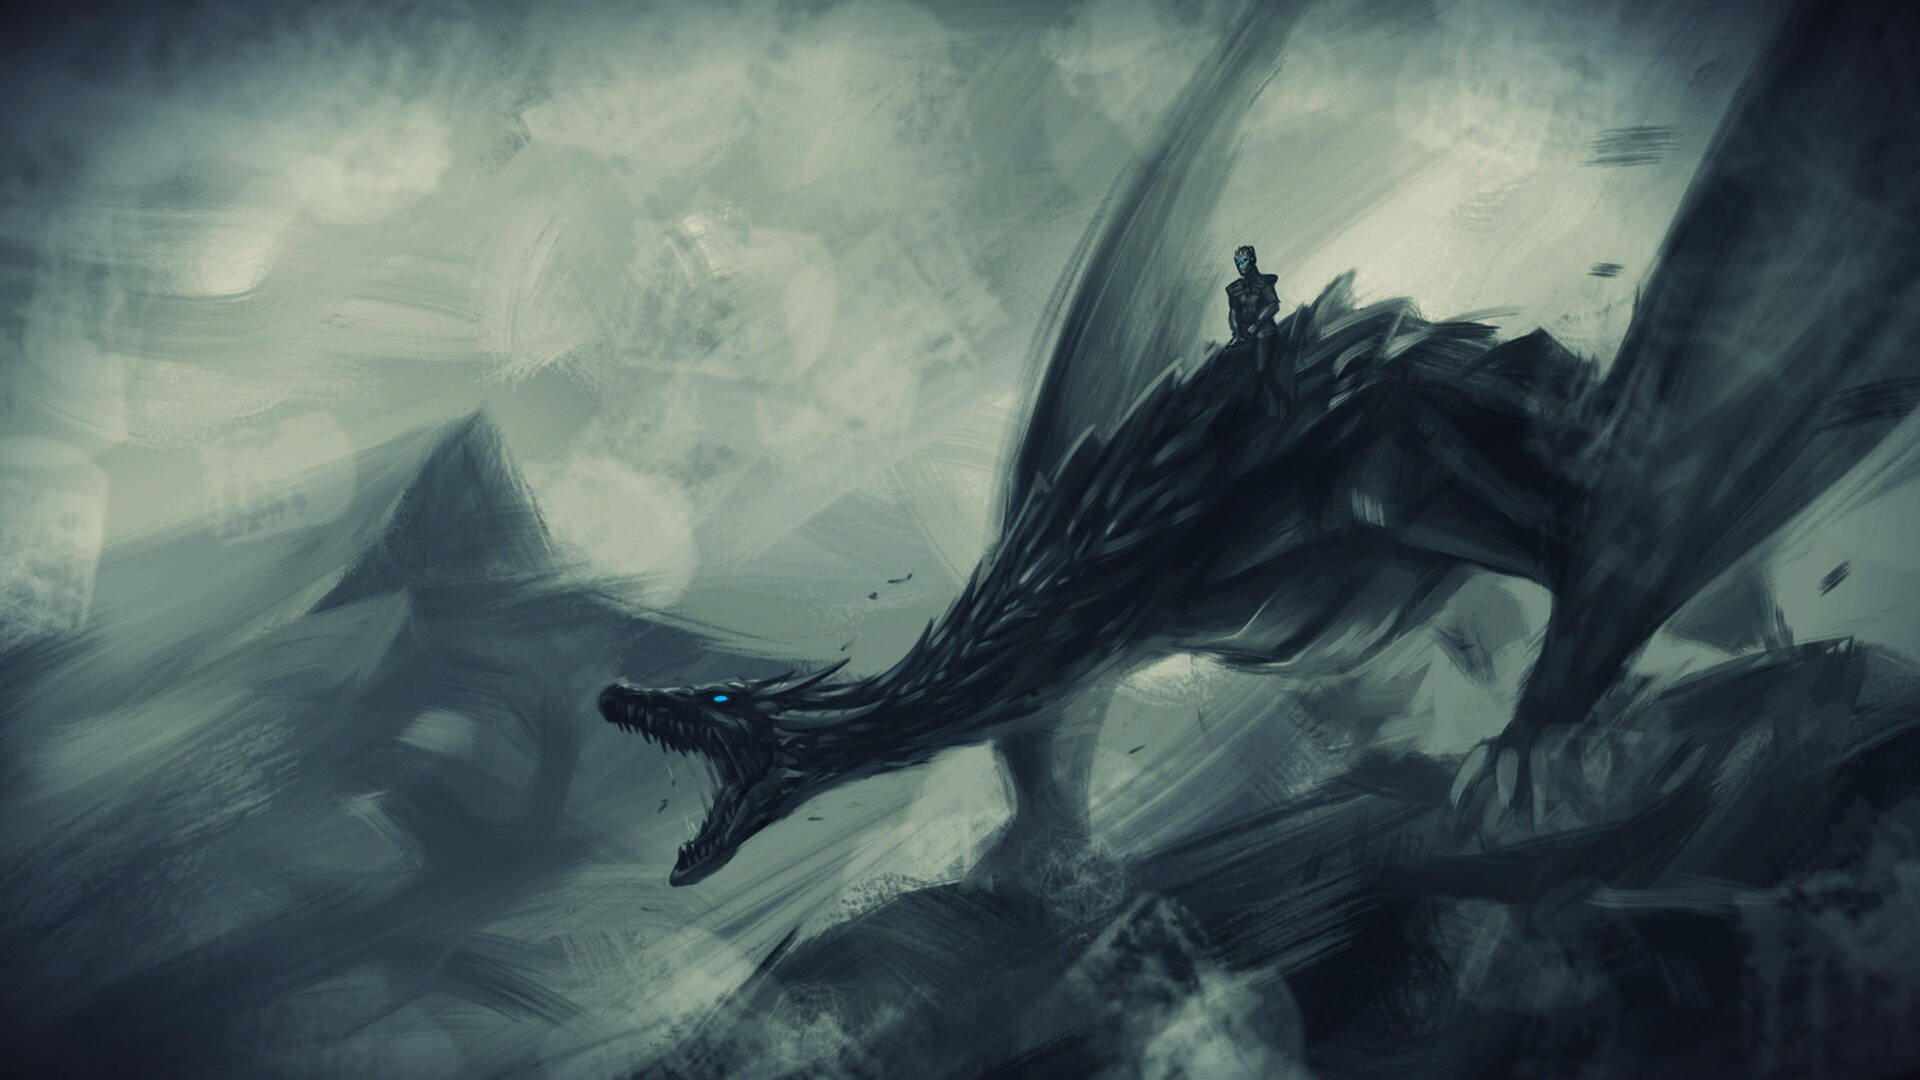 Cool Art Dragon Of Game Of Thrones